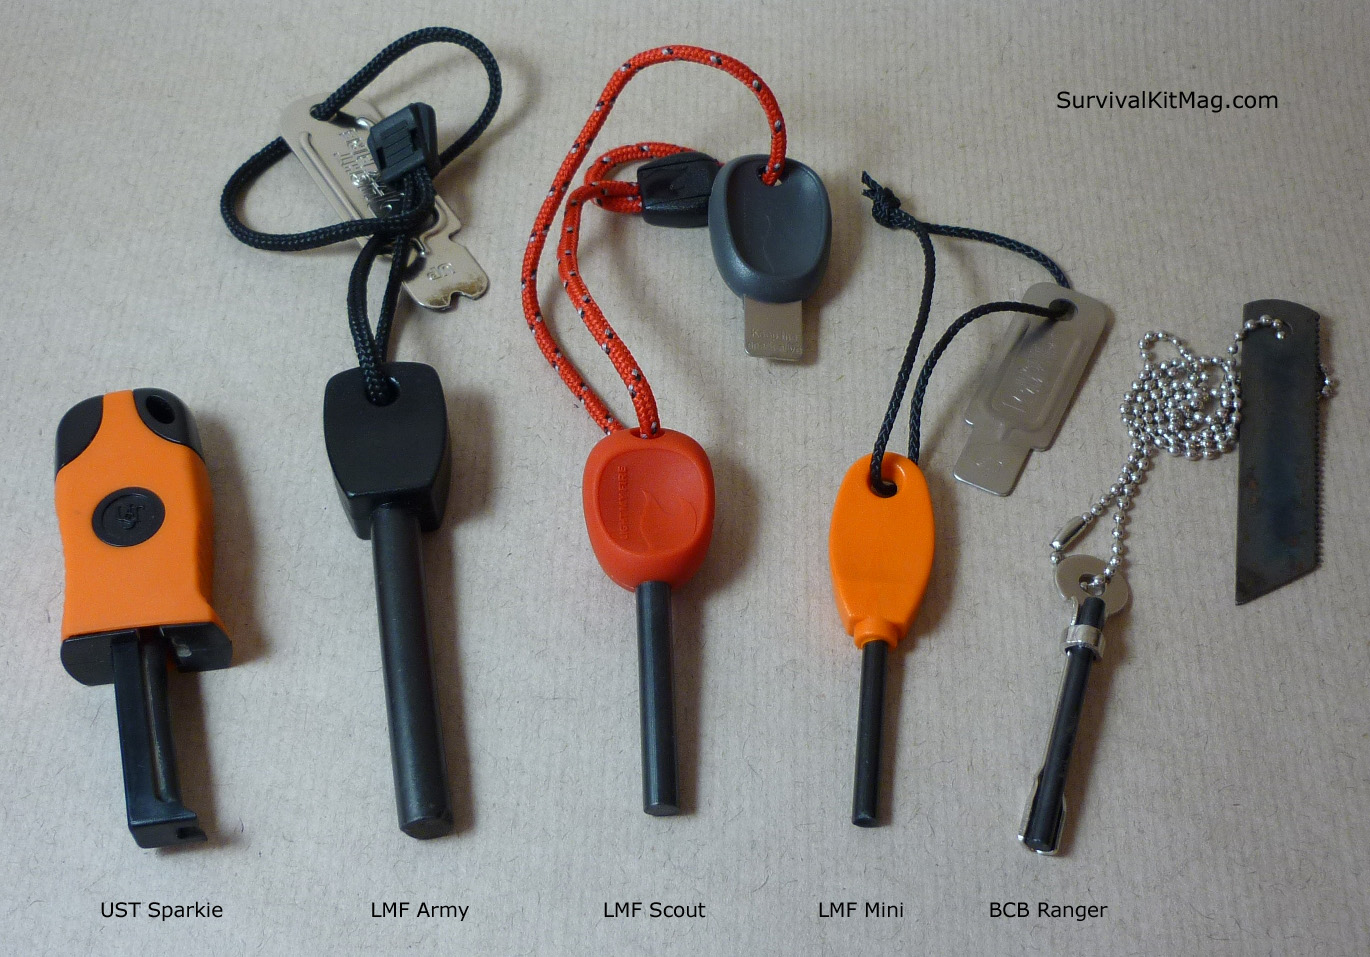 Survival Kit Light My Fire compared Army, Mini